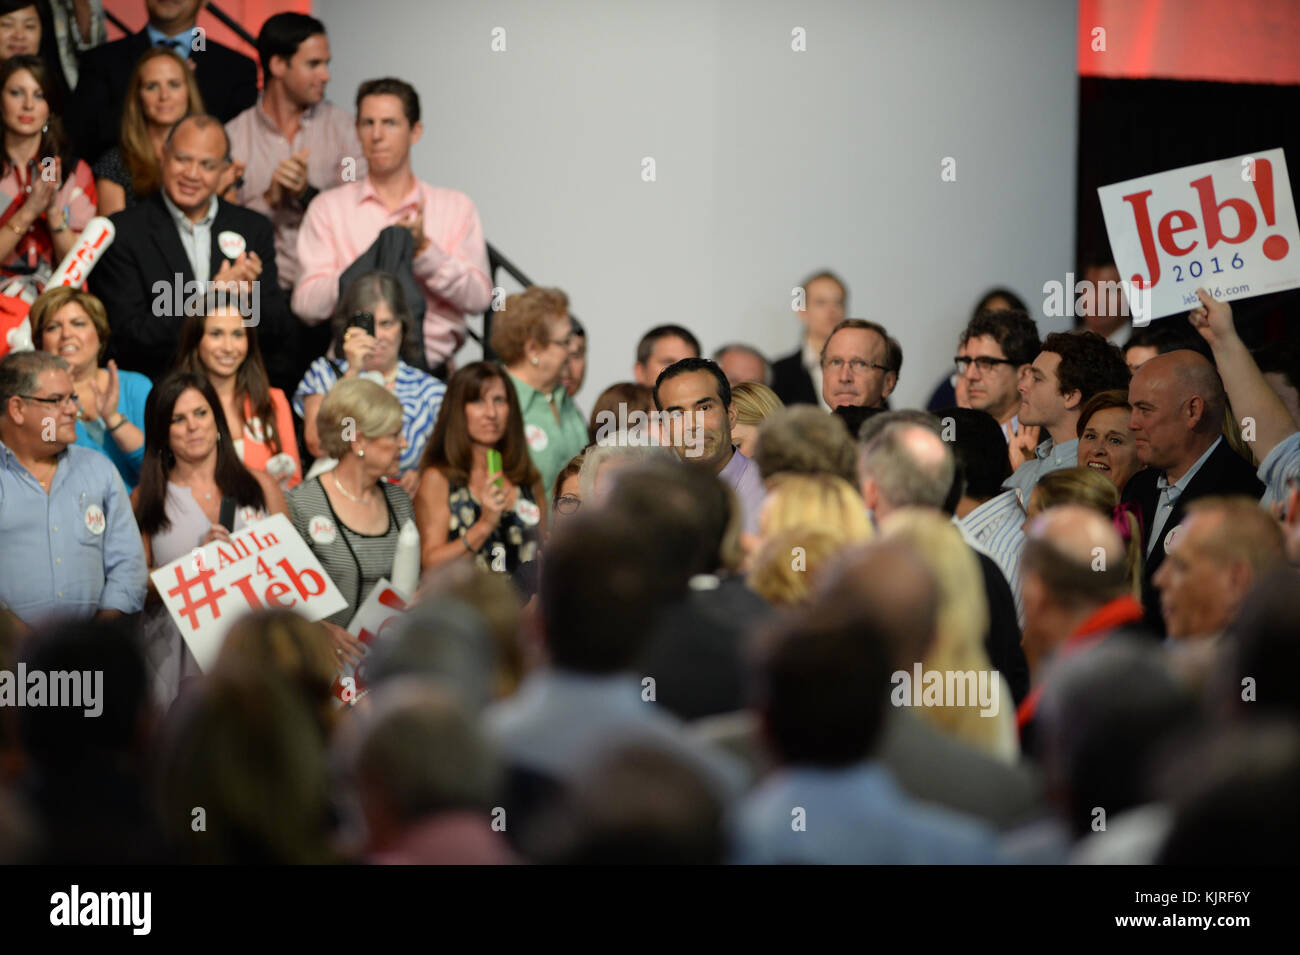 MIAMI, FL - JUNE 15: Former Florida Governor Jeb Bush on stage to announce his candidacy for the 2016 Republican presidential nomination at Miami Dade College - Kendall Campus Theodore Gibson Health Center (Gymnasium) June 15, 2015 in Miami, Florida. John Ellis 'Jeb' Bush will attempt to follow his brother and father into the nation's highest office when he officially announces today that he'll run for president of the United States   People:  George P. Bush Stock Photo